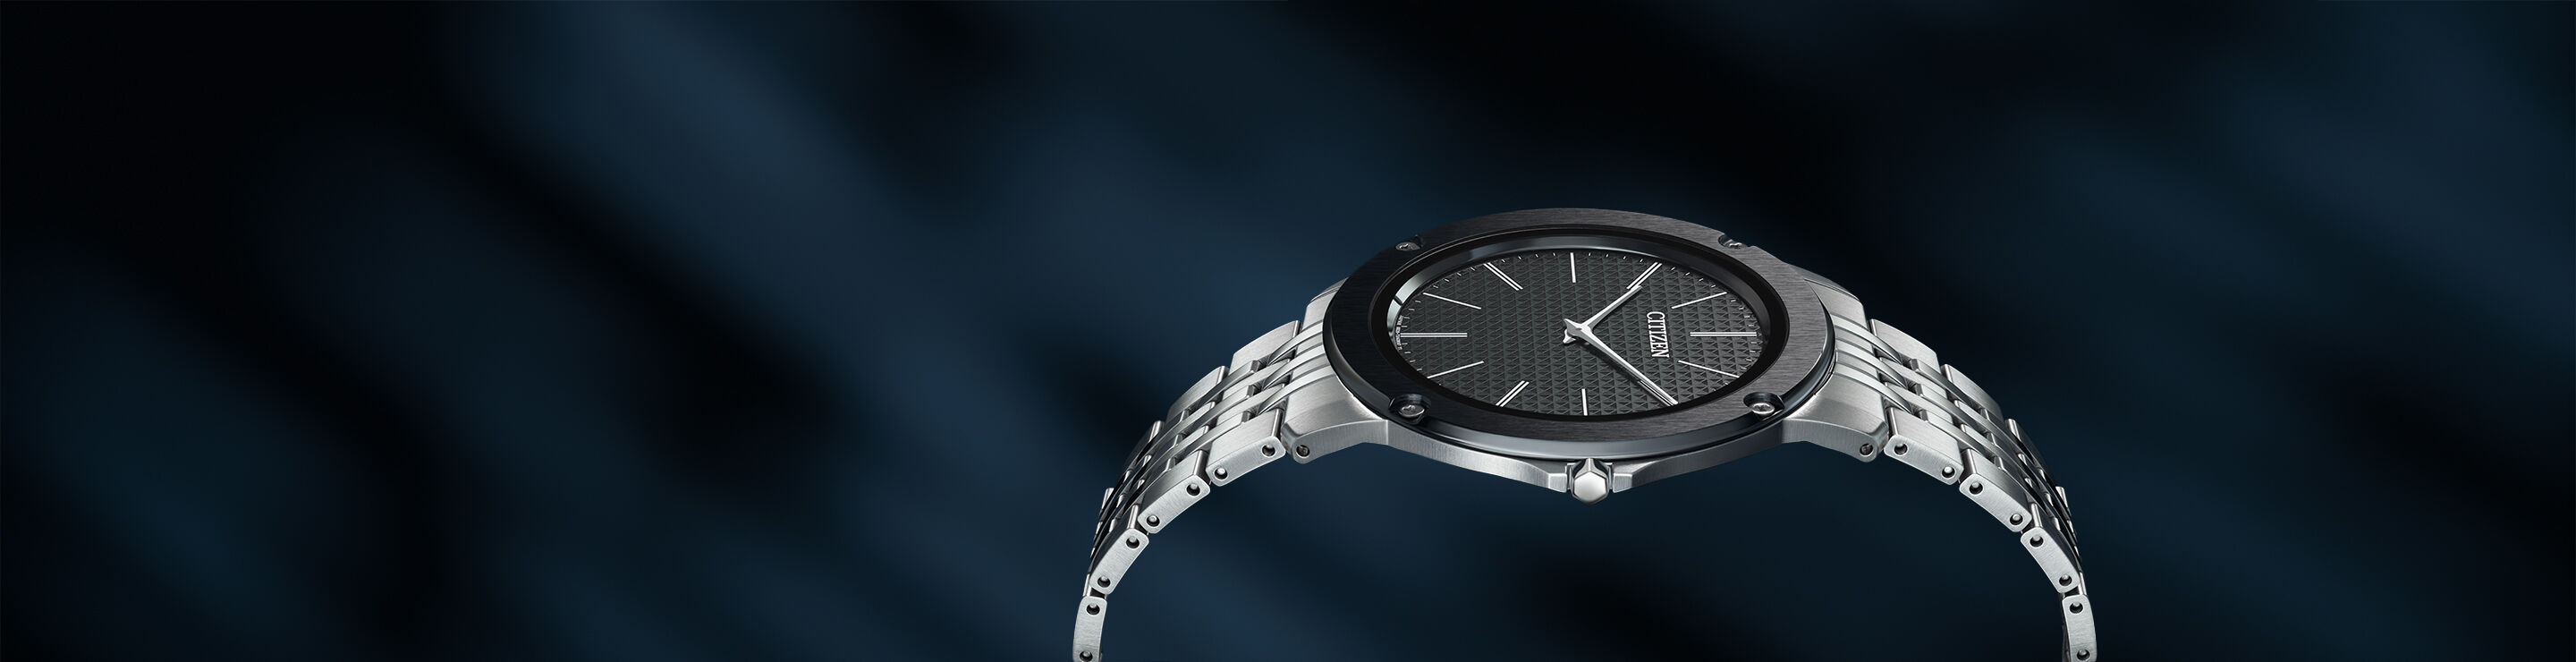 Eco-Drive One Watches - Our Thinnest Light-Powered Watch. | CITIZEN